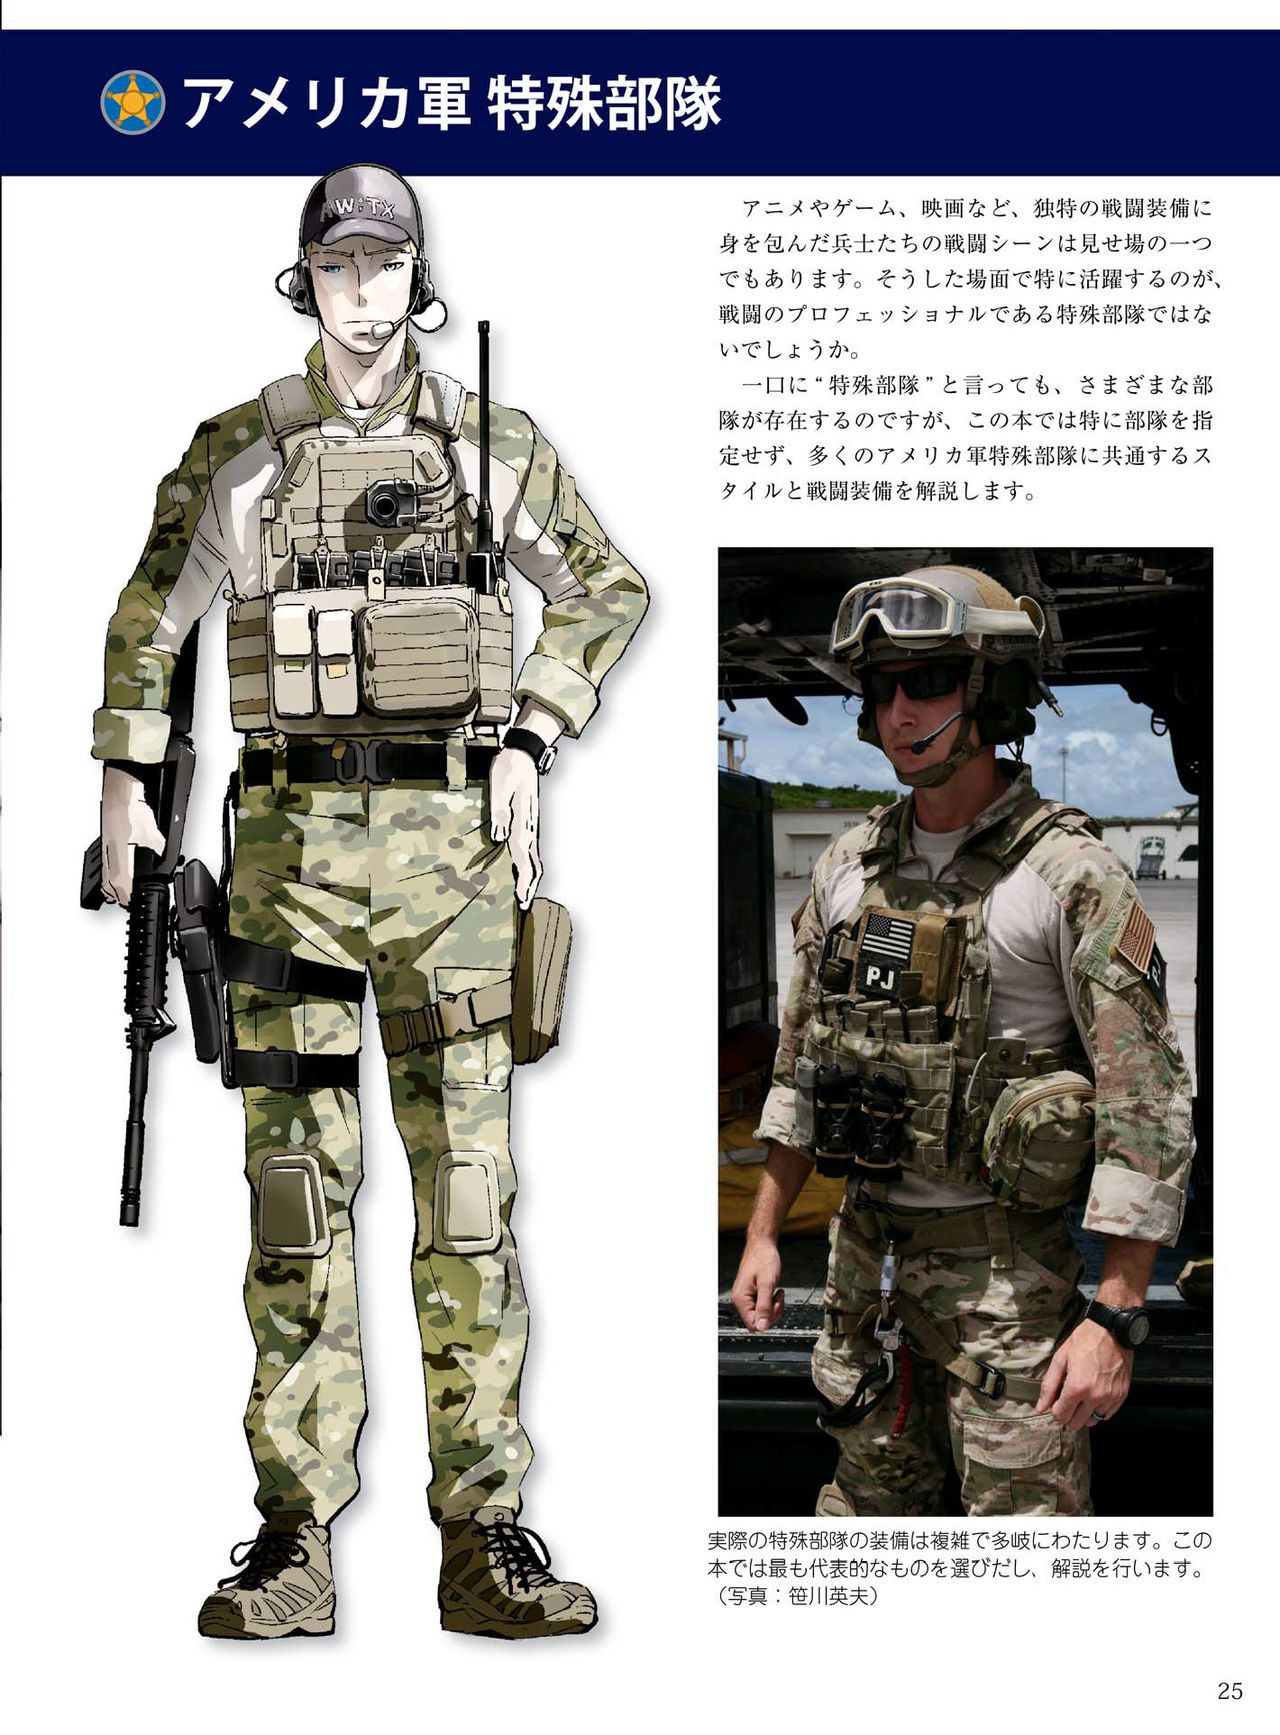 How to draw military uniforms and uniforms From Self-Defense Forces 軍服・制服の描き方 アメリカ軍・自衛隊の制服から戦闘服まで 28